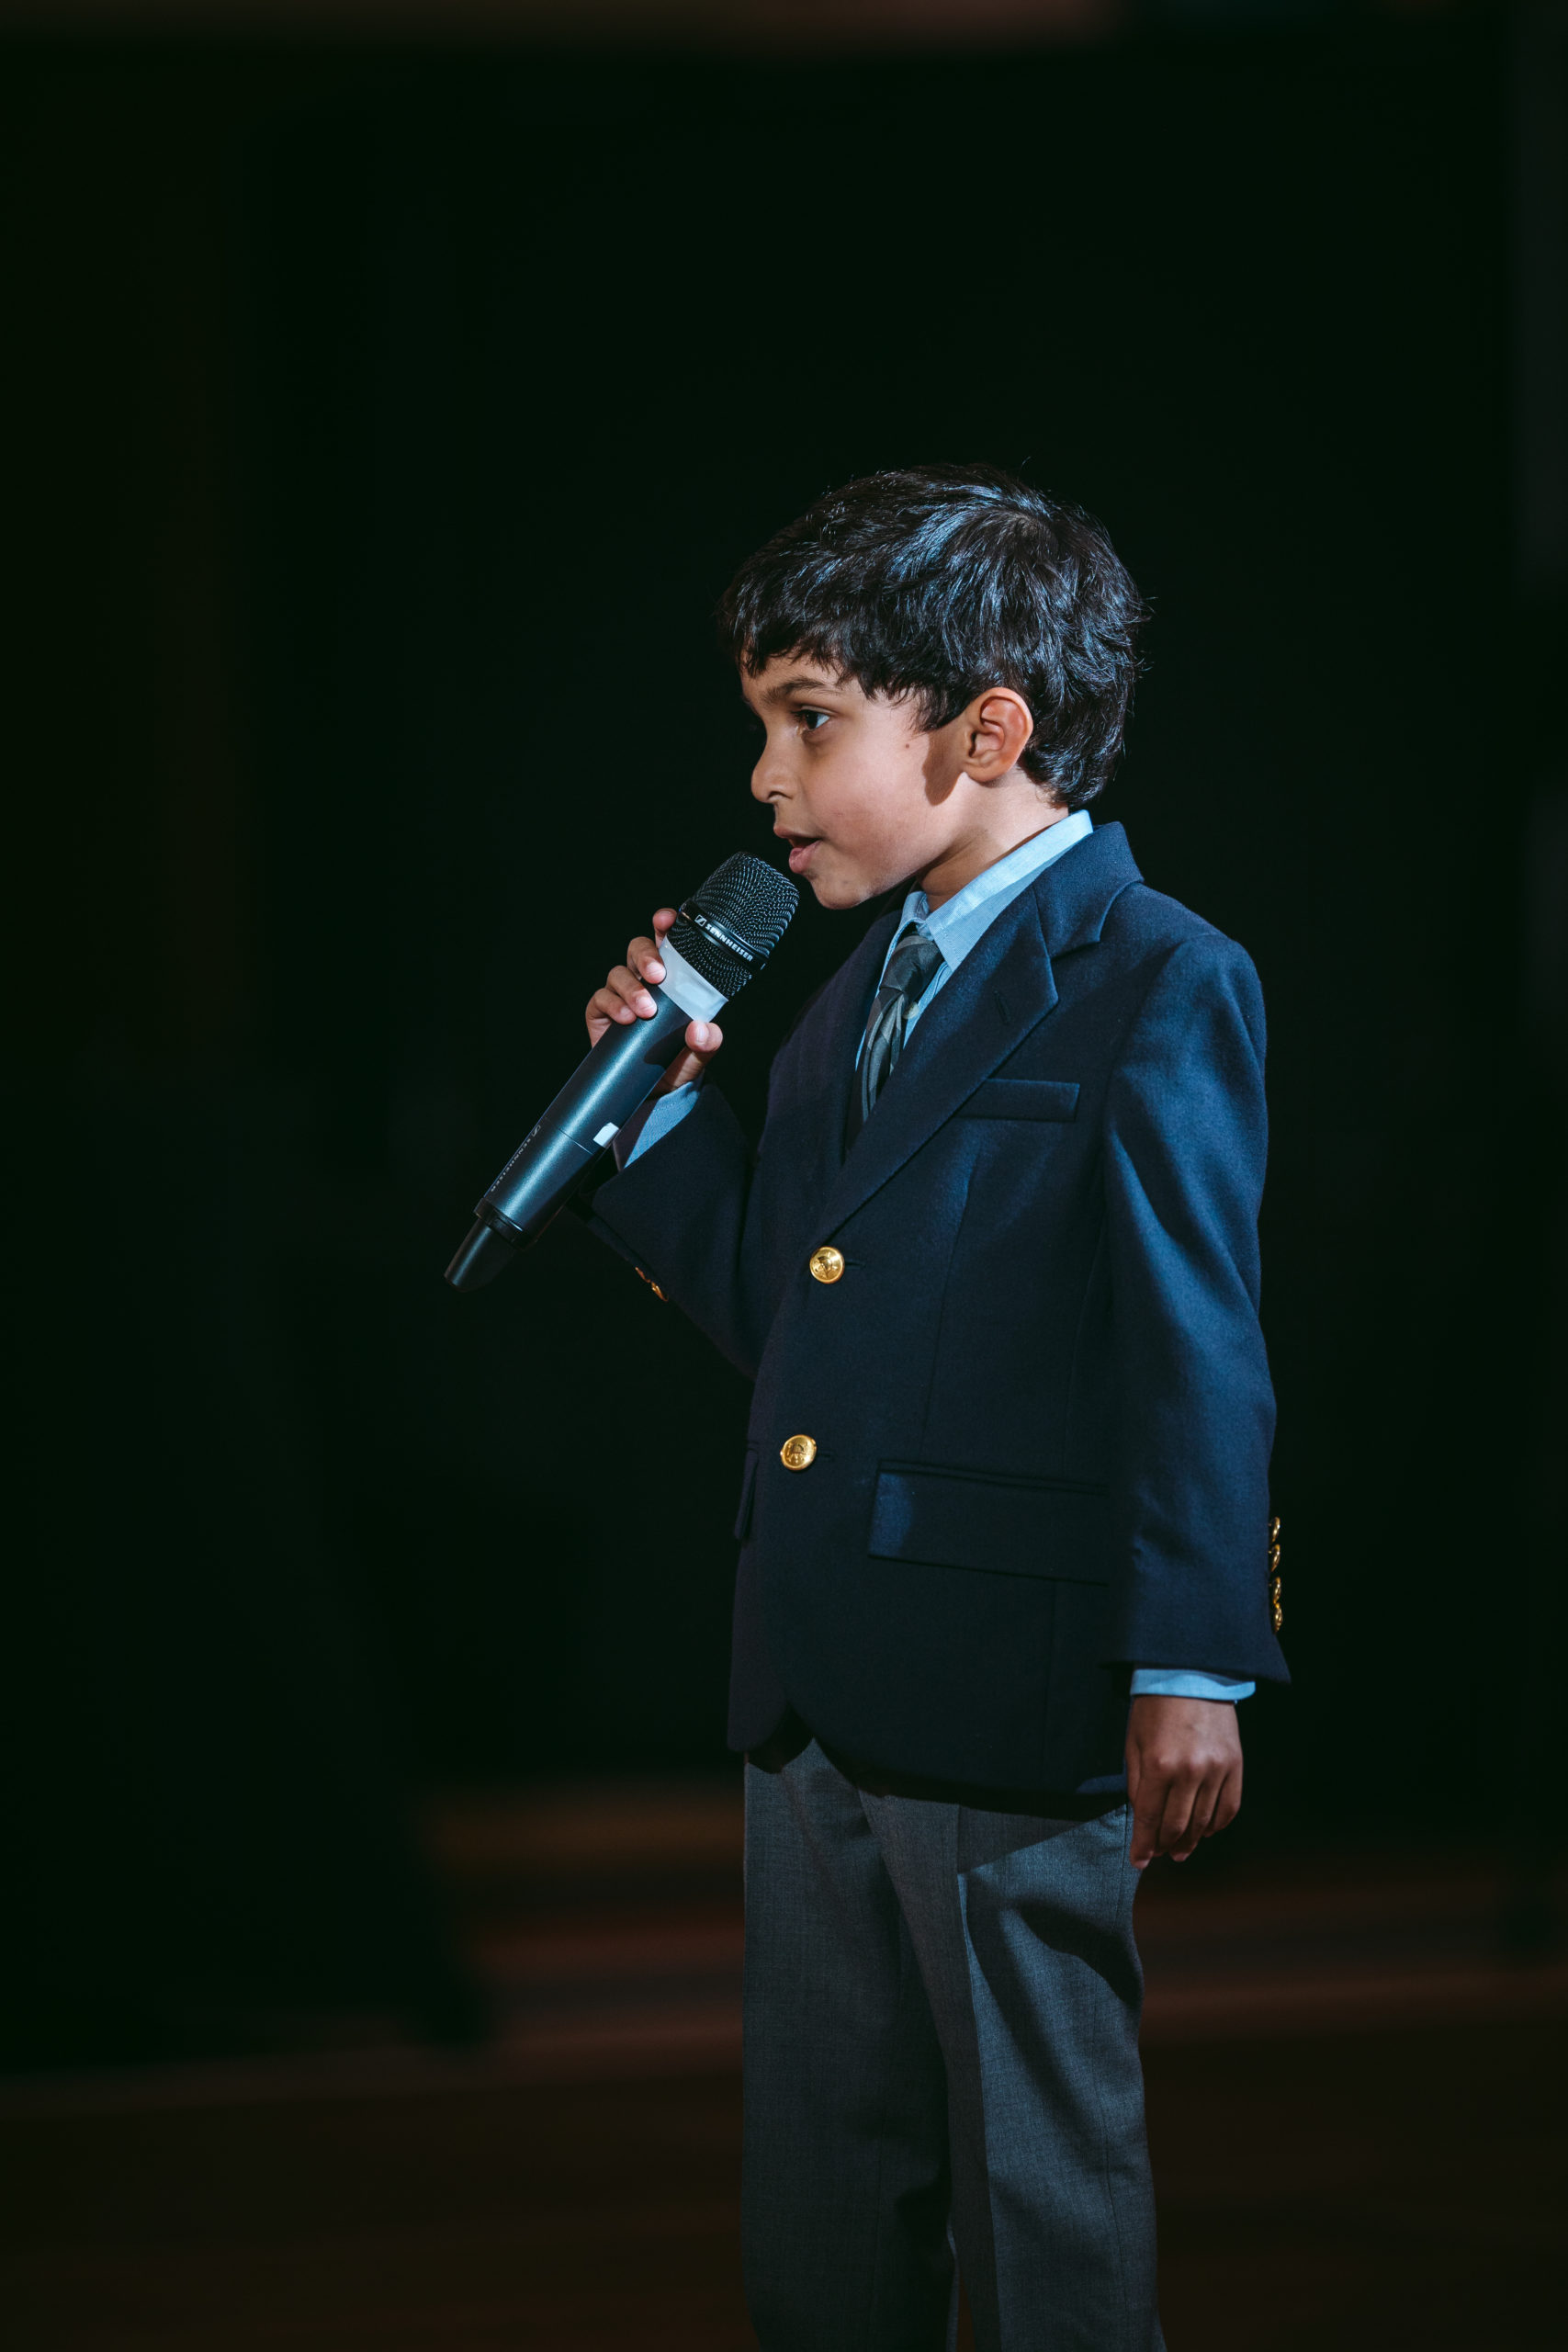 Young boy delivering a reception speech with great microphone placement